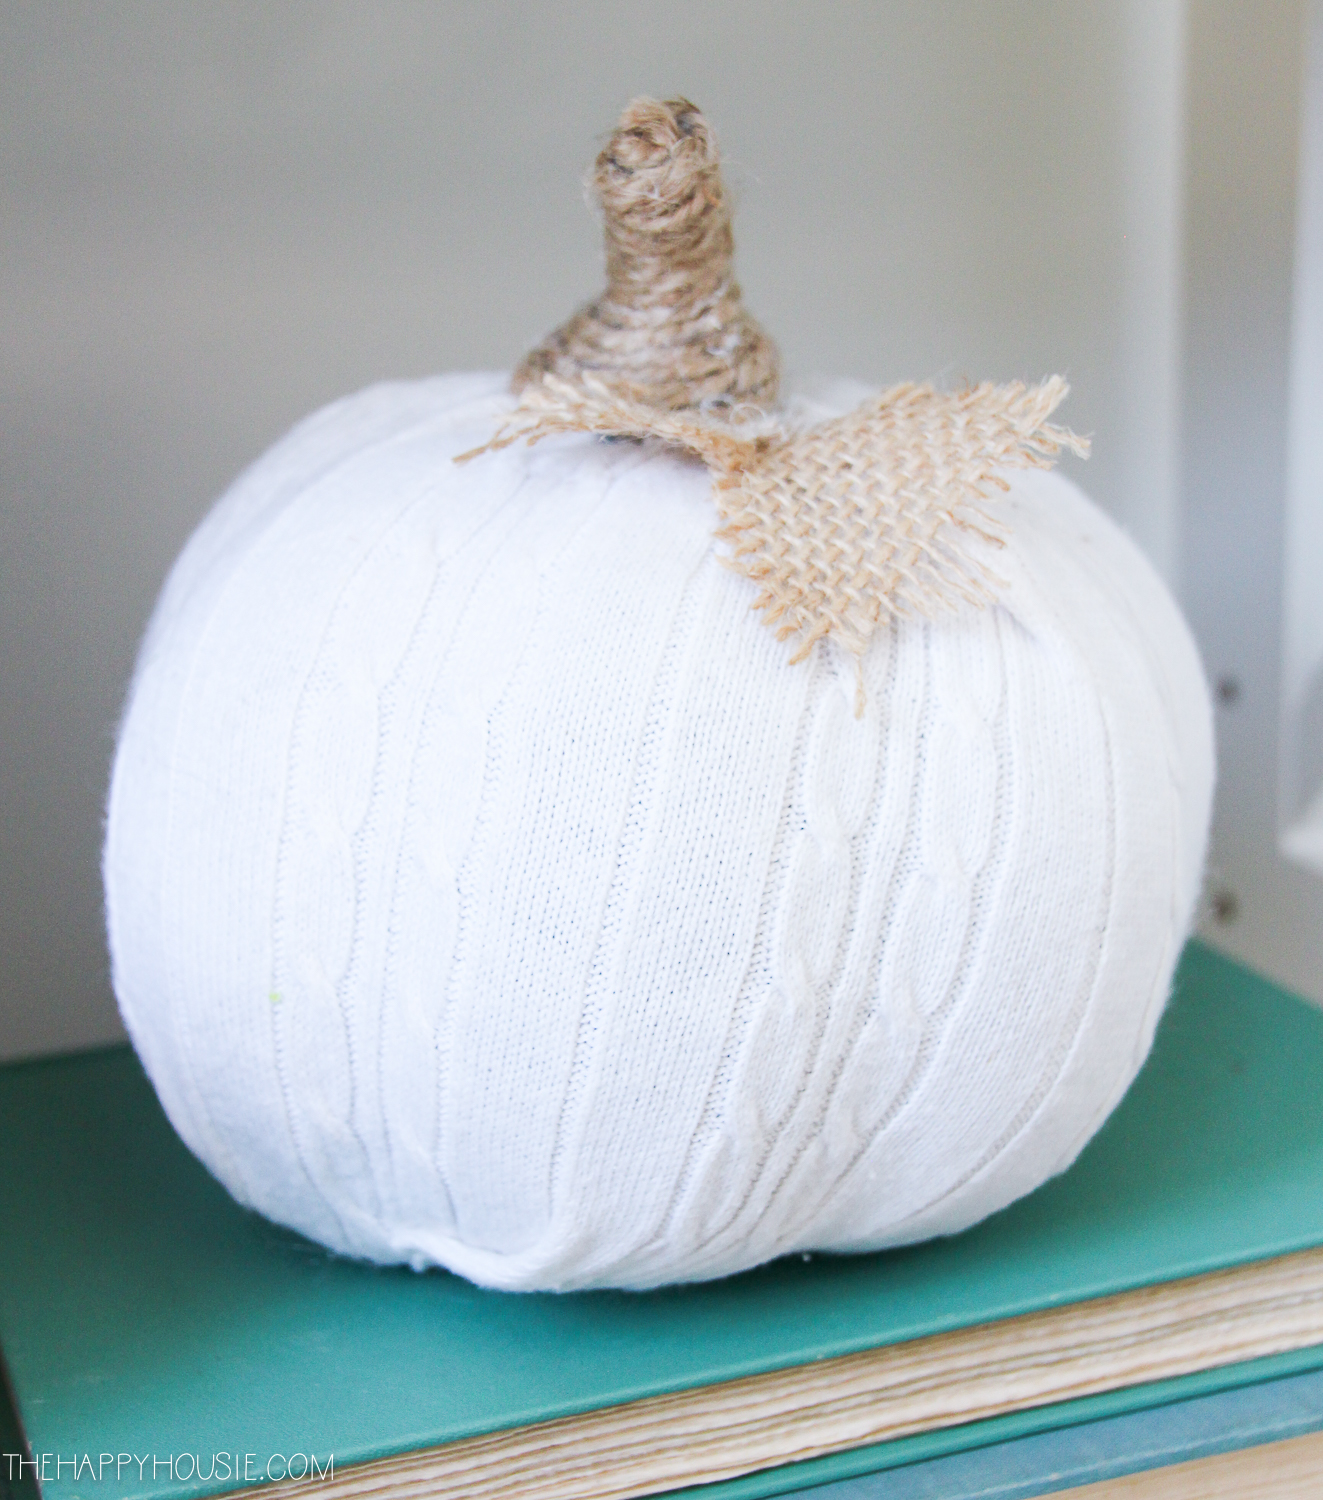 A white pumpkin that is an up close picture.